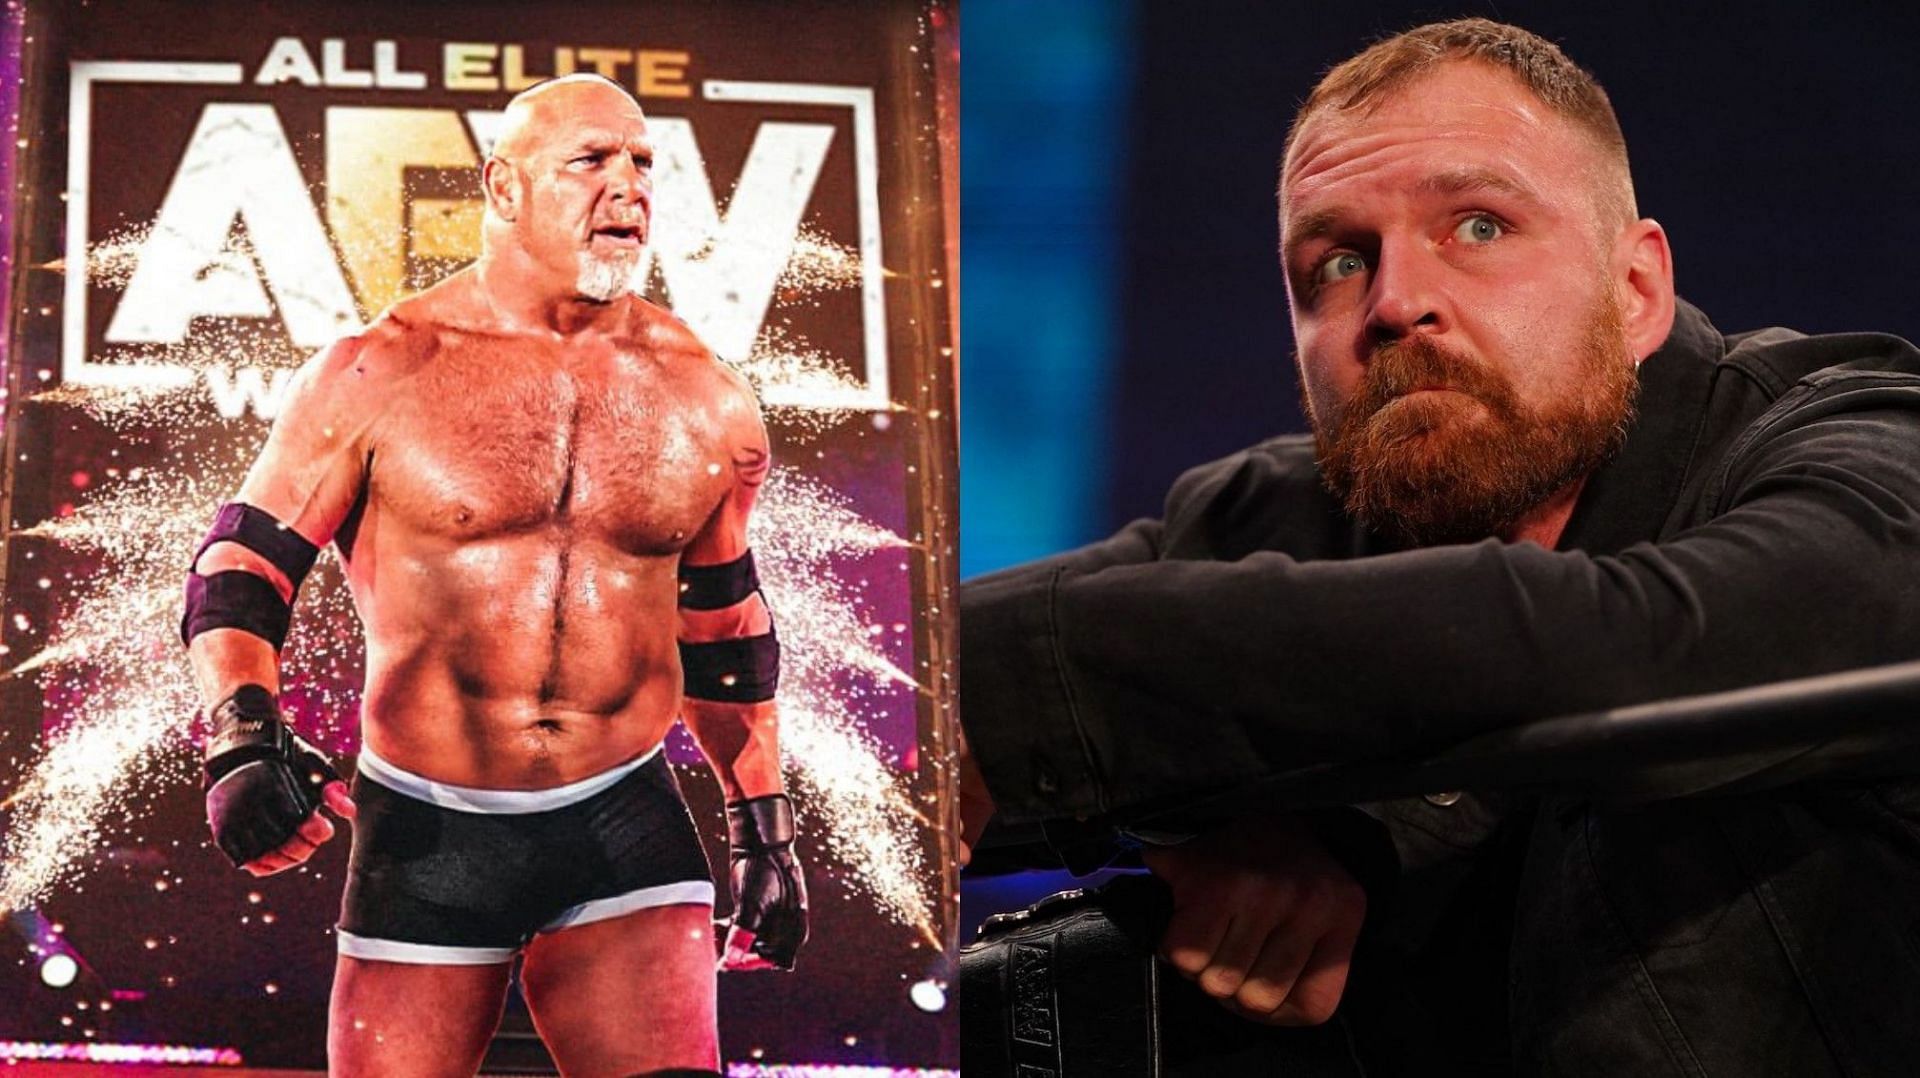 Will these two men come face-to-face in AEW someday?